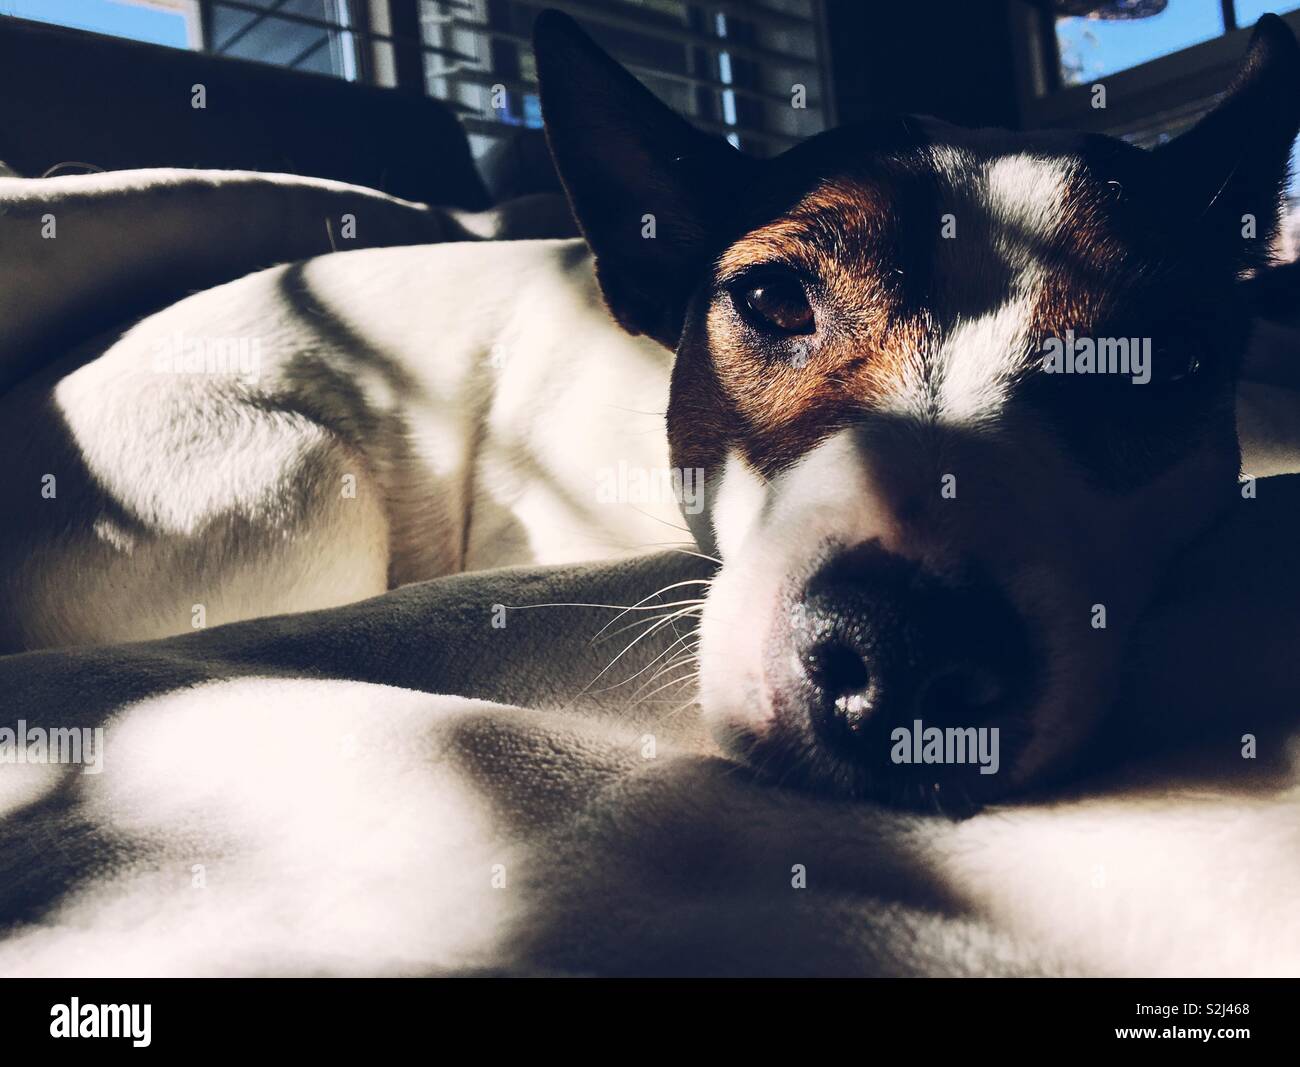 Sleepy dog in sunshine with shadows of window covering on her. Stock Photo